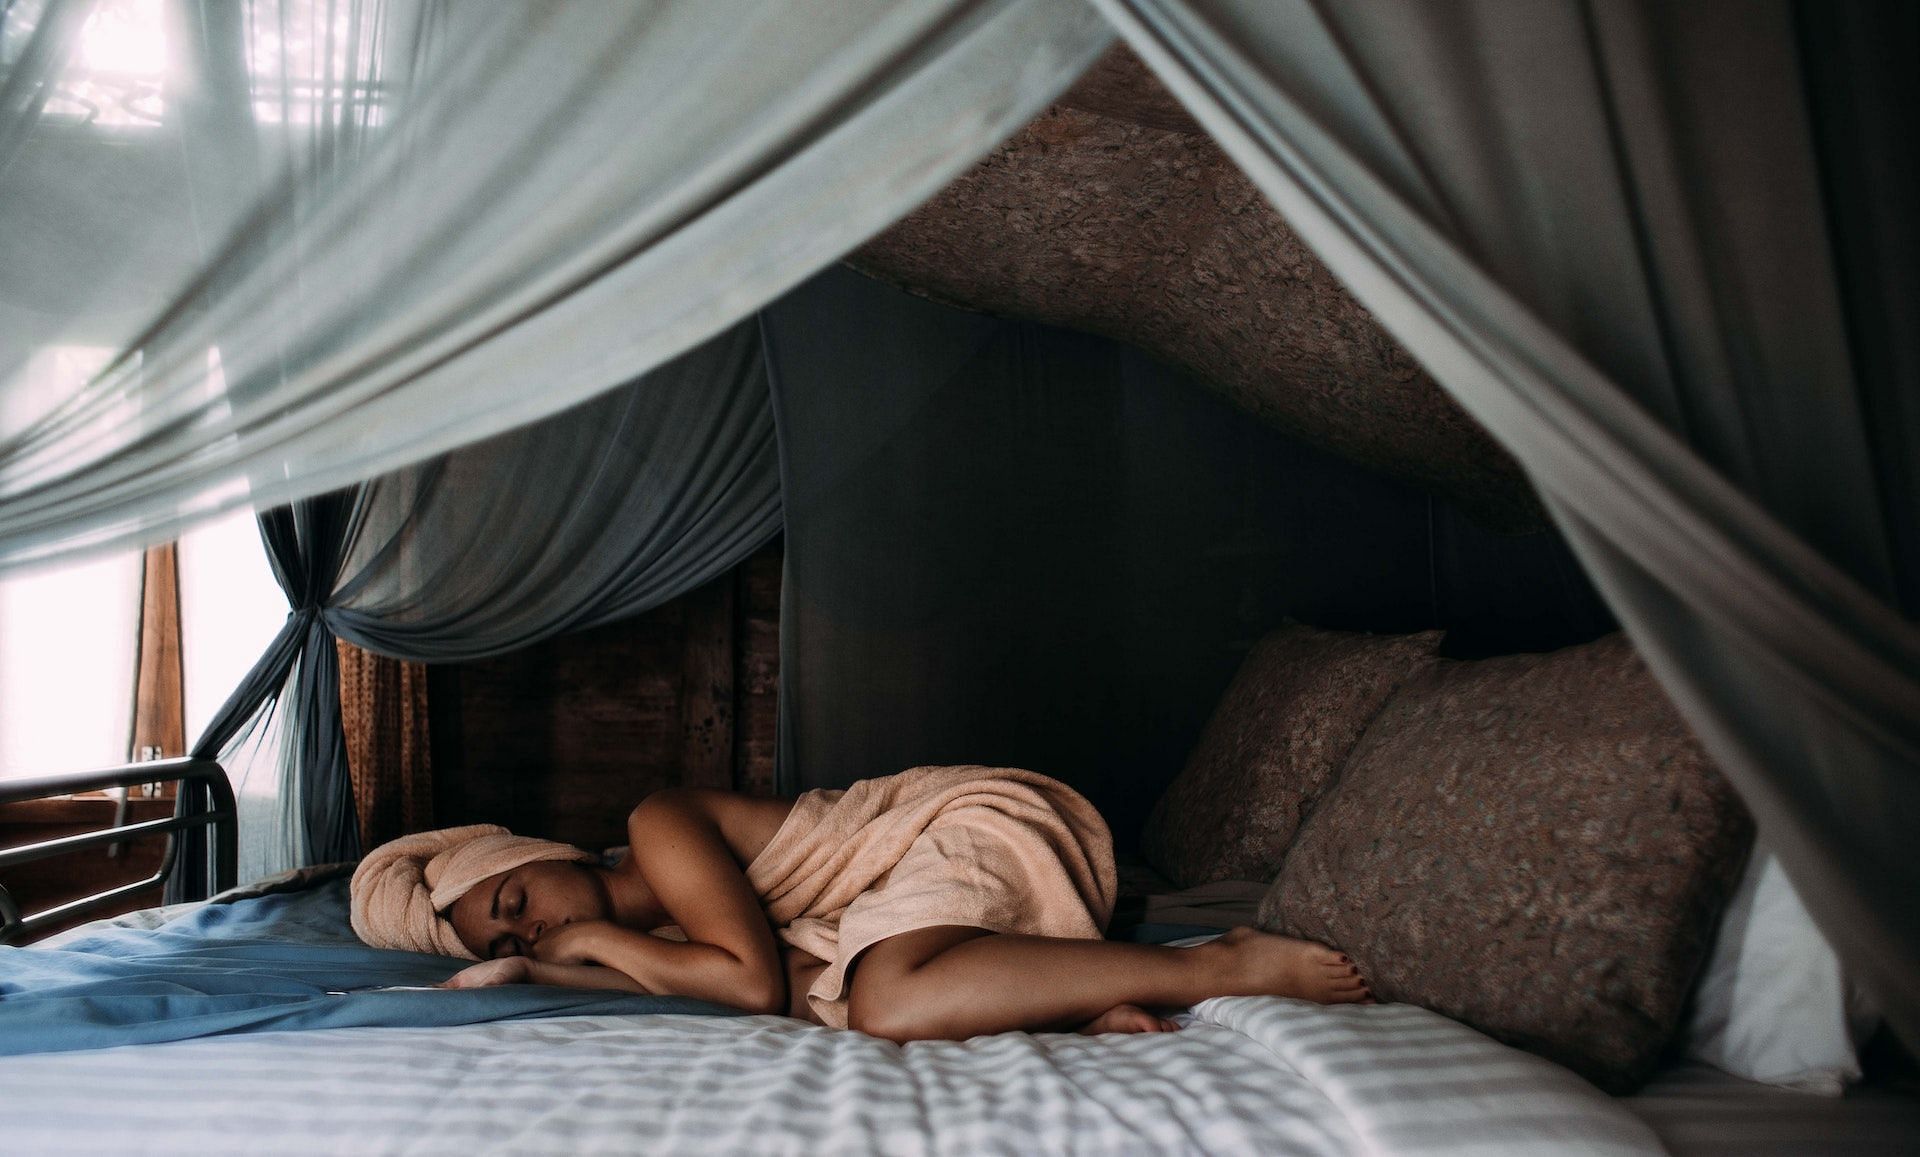 Sleep deprivation can lead to weight gain during menopause. (Photo via Pexels/Rachel Claire)